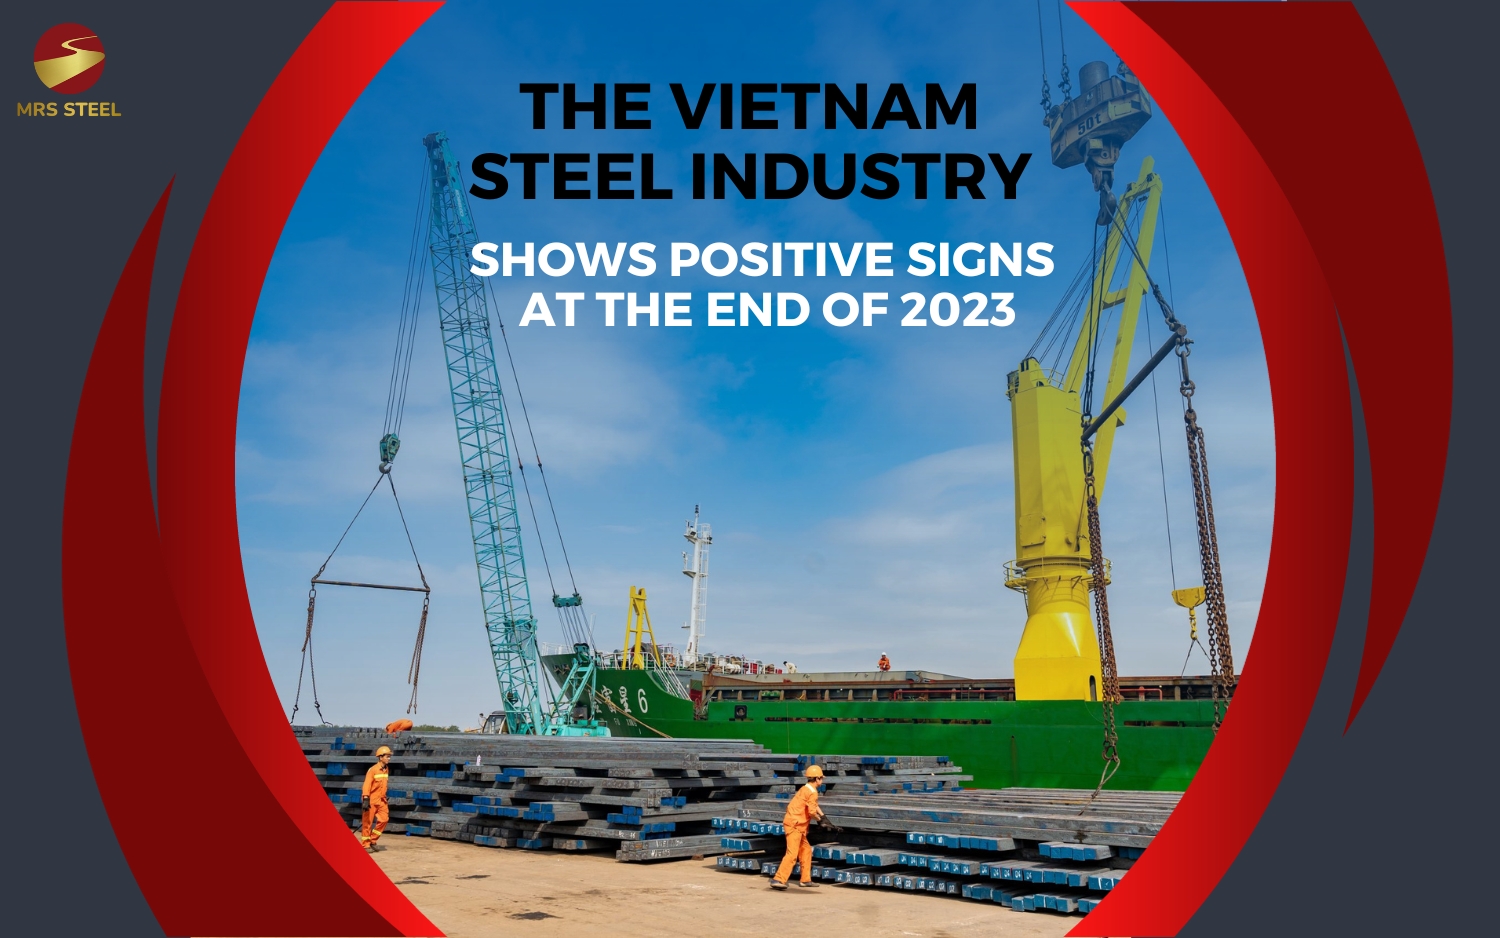 Vietnam Steel Industry Shows Optimistic Signals for the End of 2023